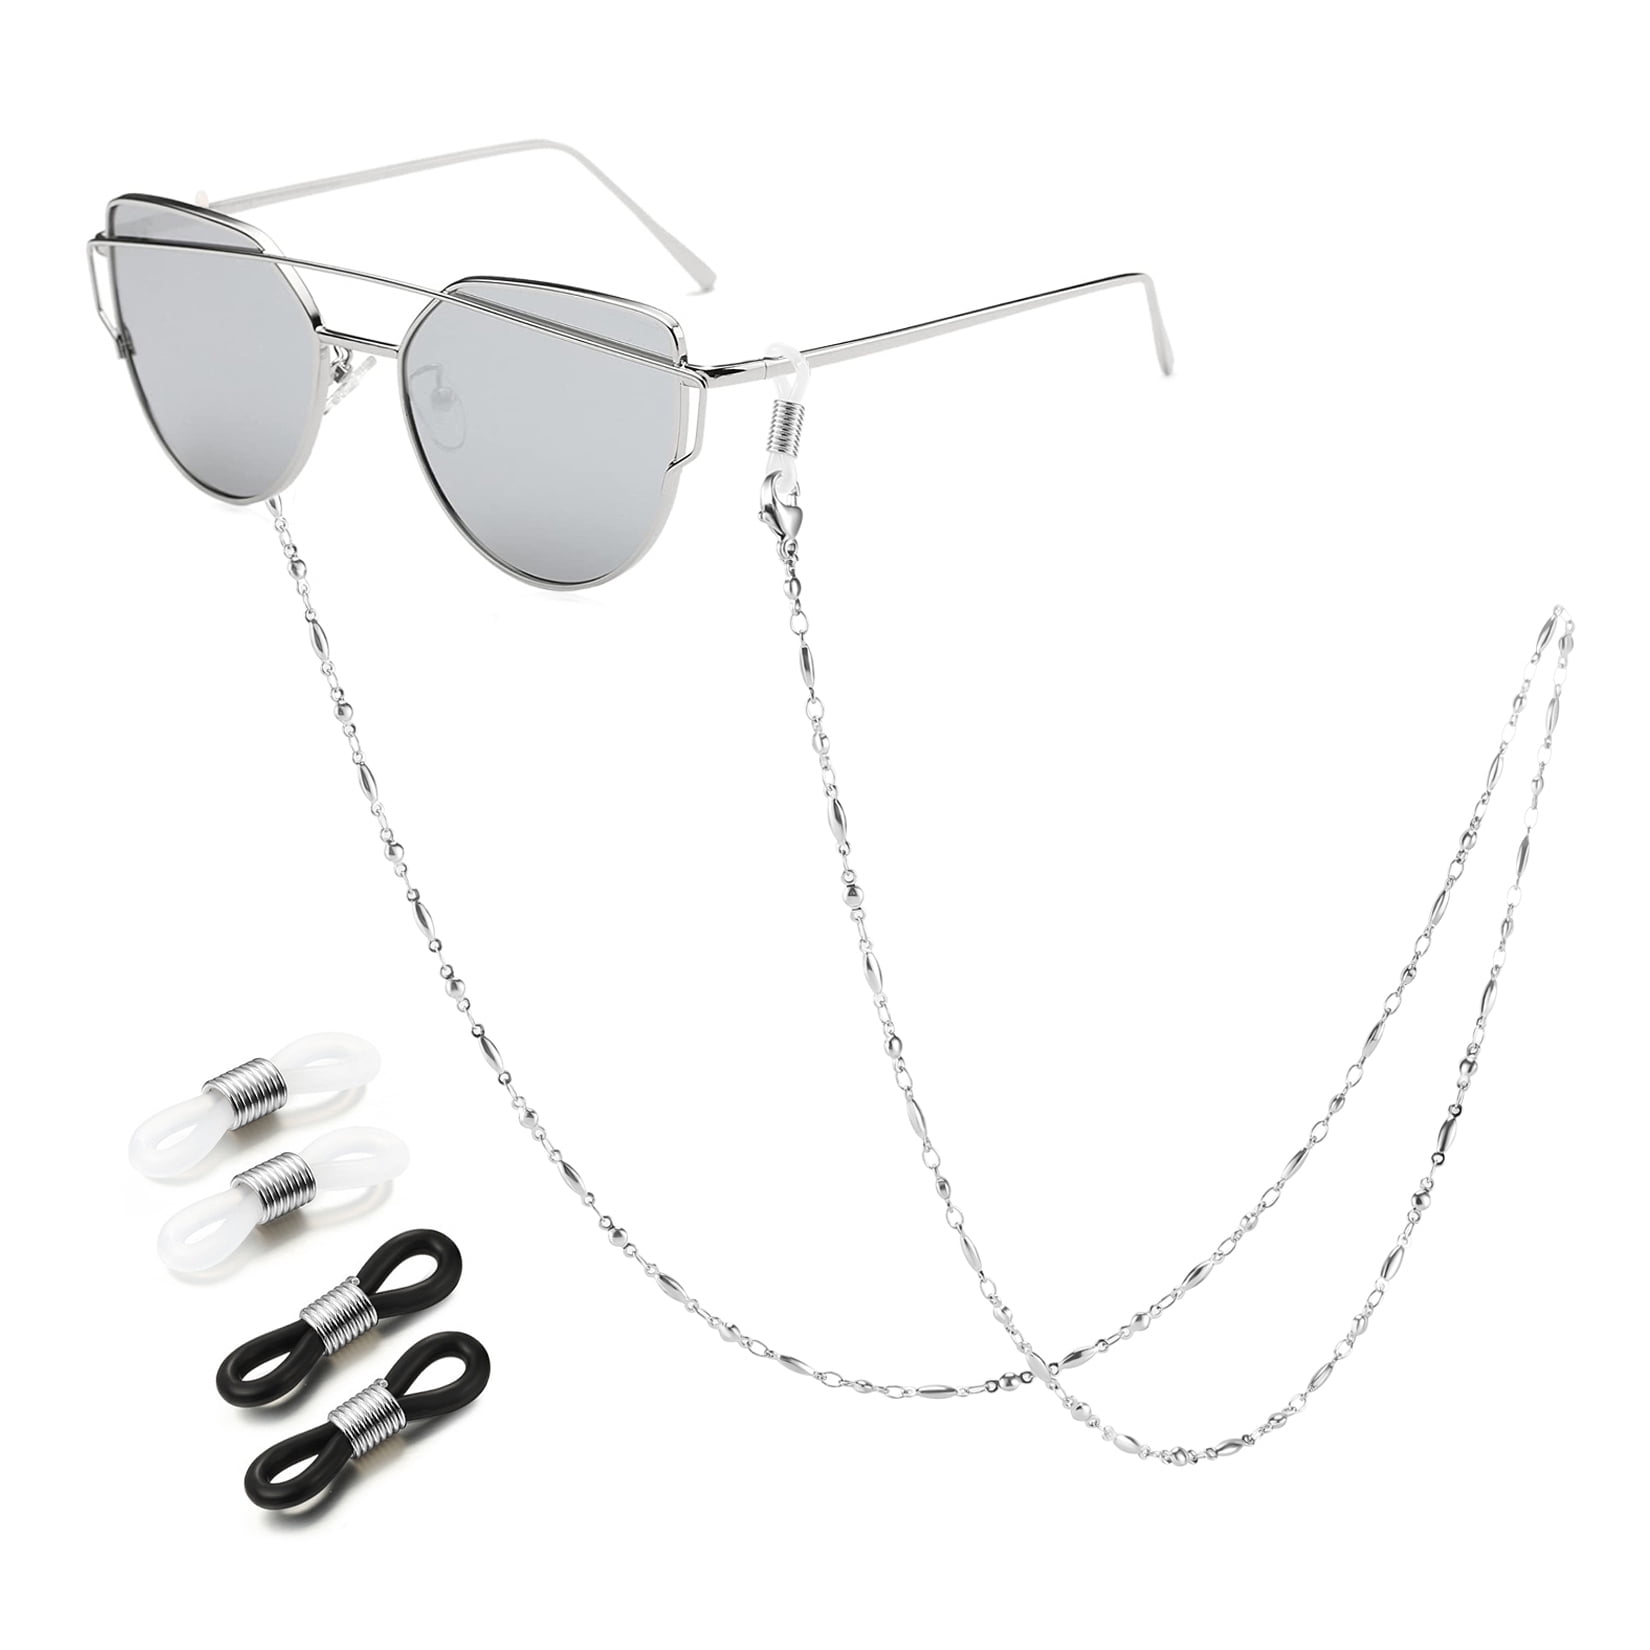 Sither Pearl Sunglasses Chian Reading Glasses Chain Strap Necklace